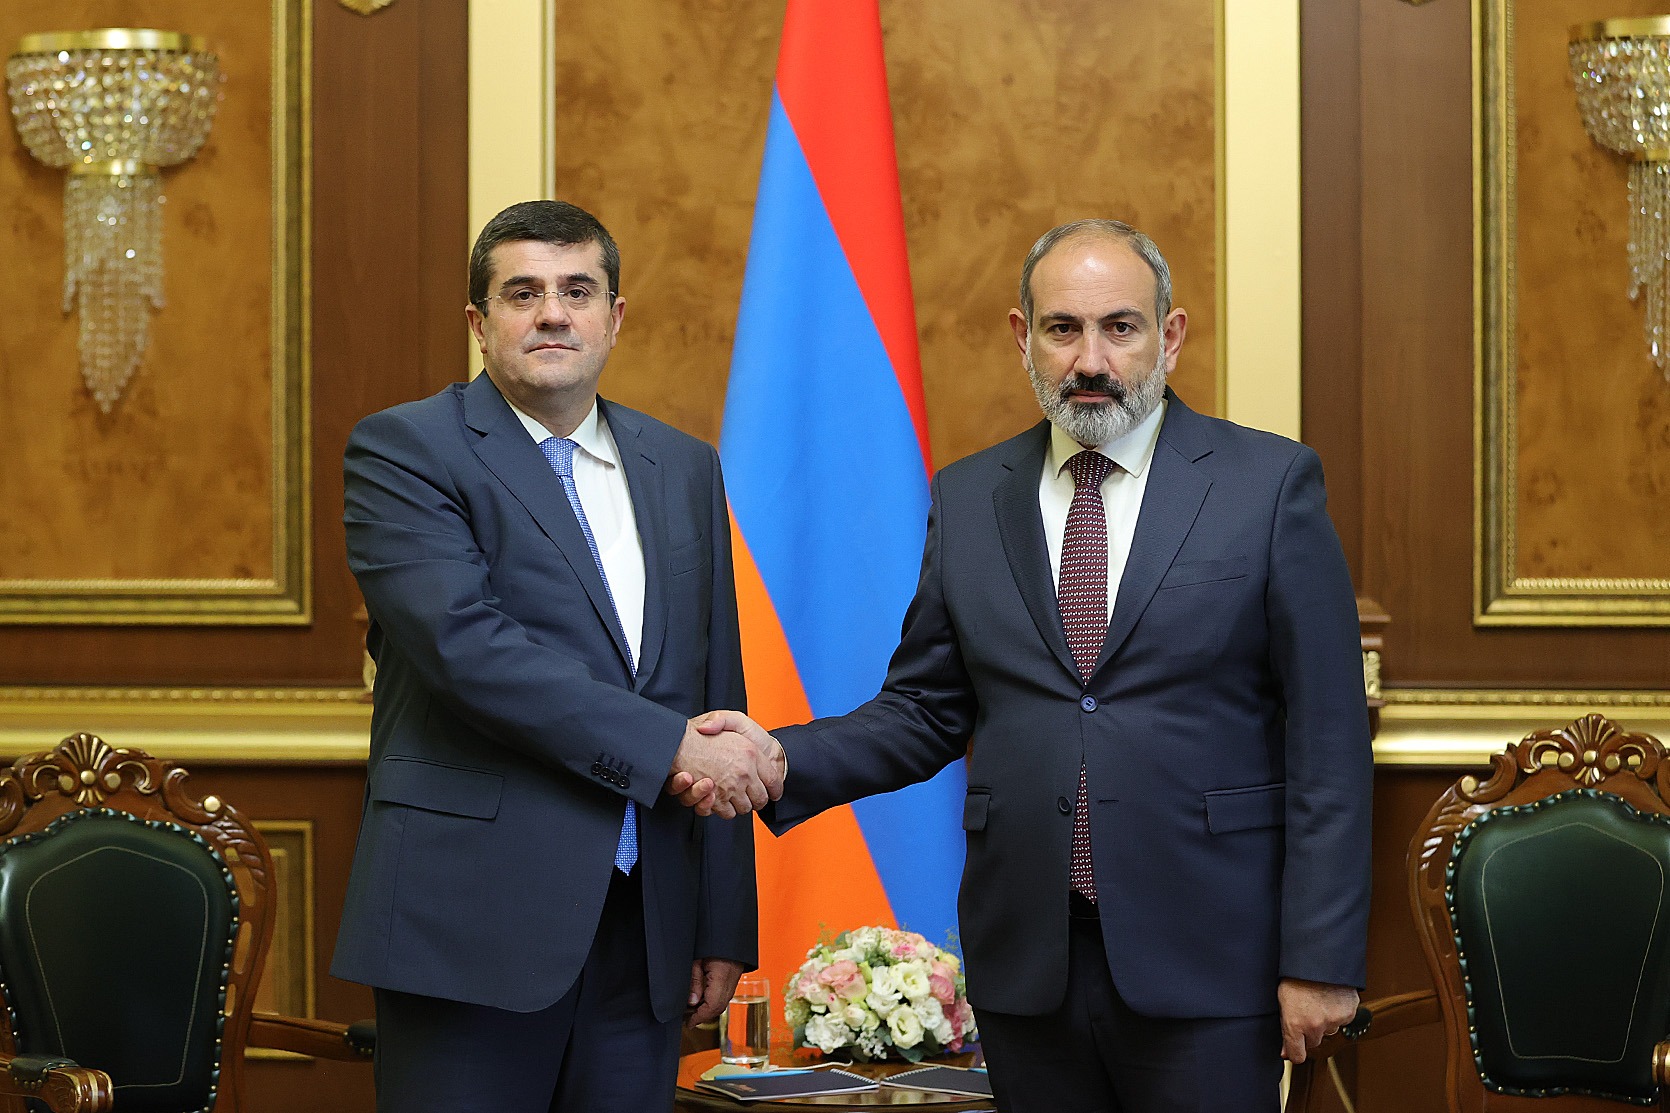 ‘The most important item on our agenda is the issue of clarifying the status of Artsakh’ – Nikol Pashinyan meets with Arayik Harutyunyan